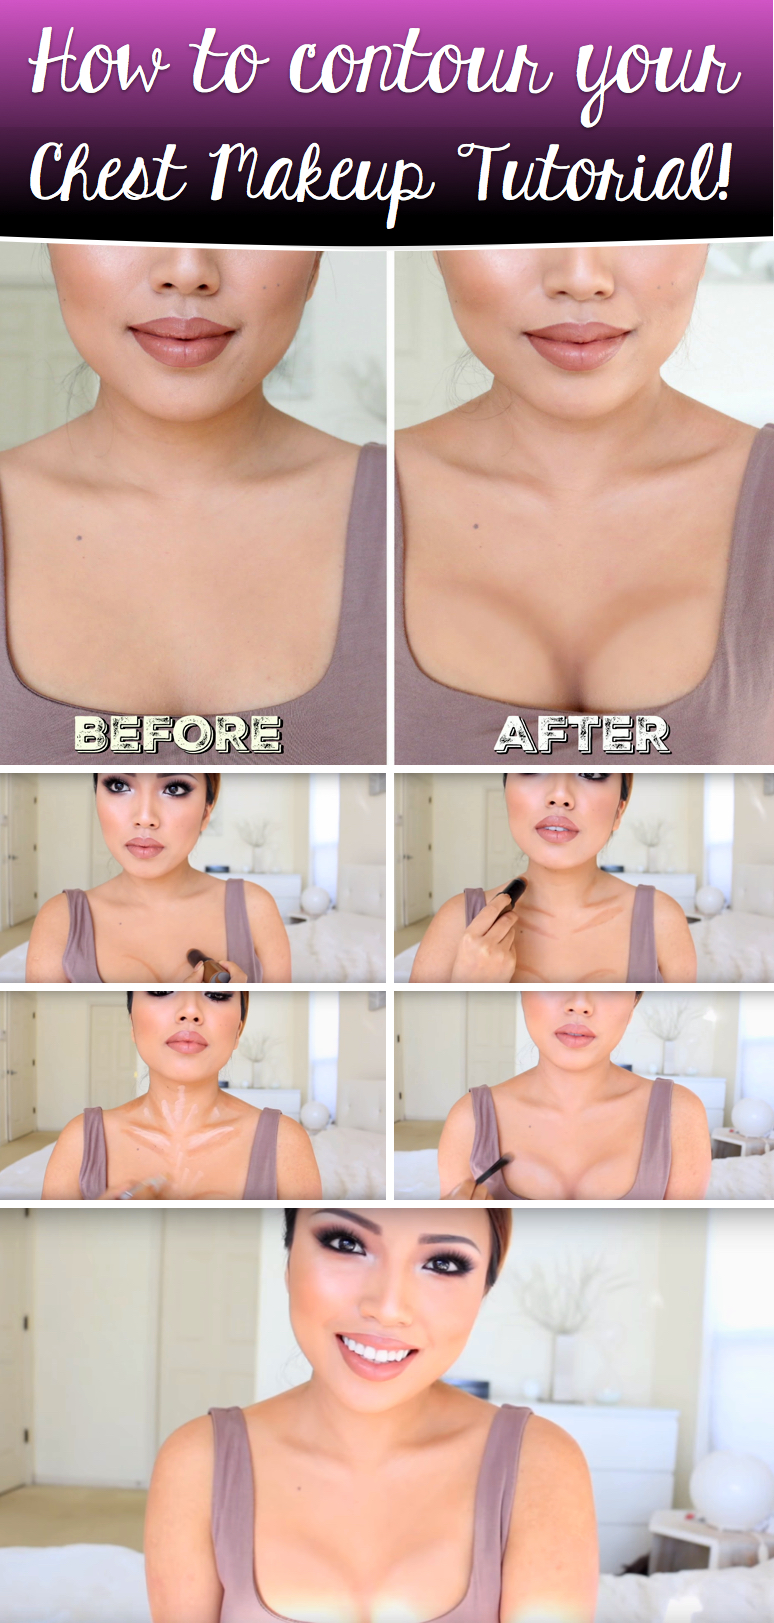 How-to-contour-your-Chest-Makeup-Tutorial-cover